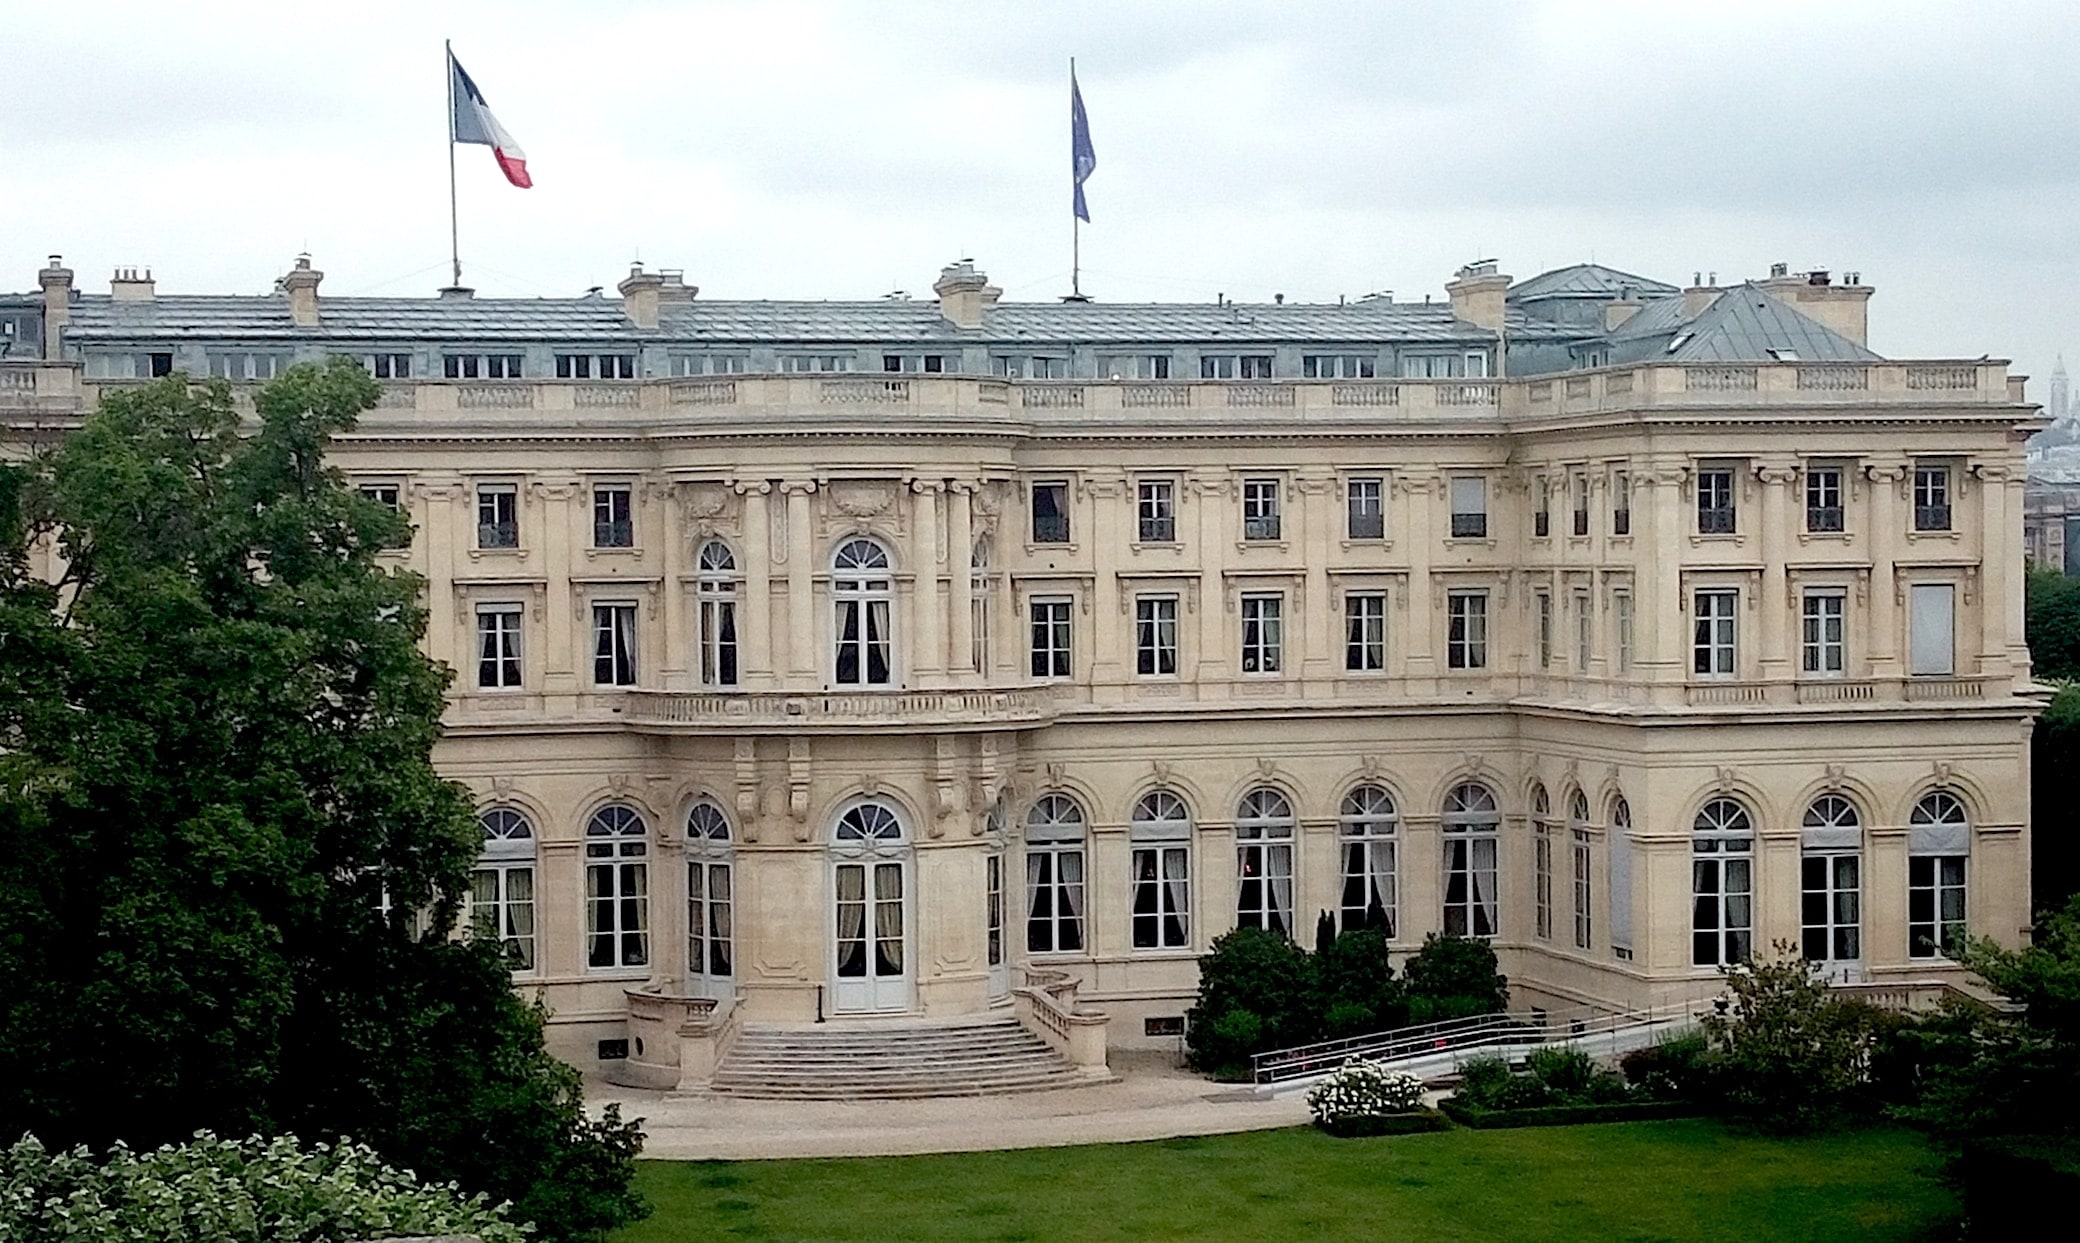 The Hotel du Ministre is an official, beautiful old building